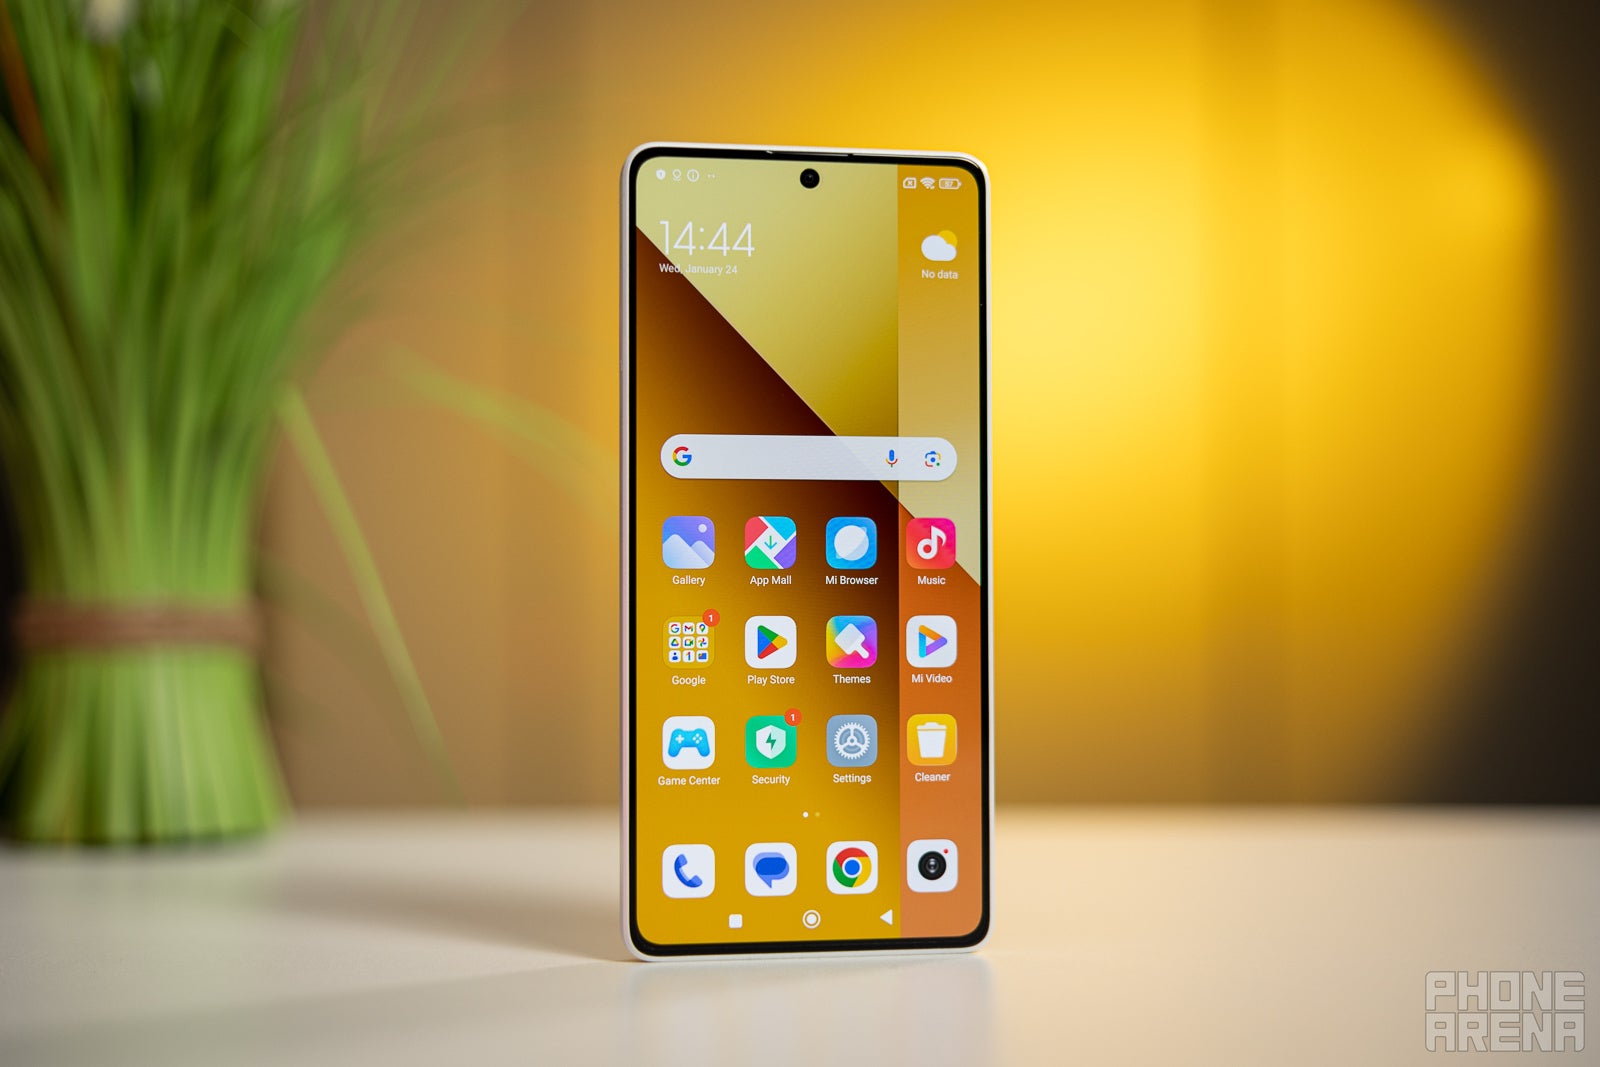 Xiaomi Redmi Note 13 4G - Full specifications, price and reviews